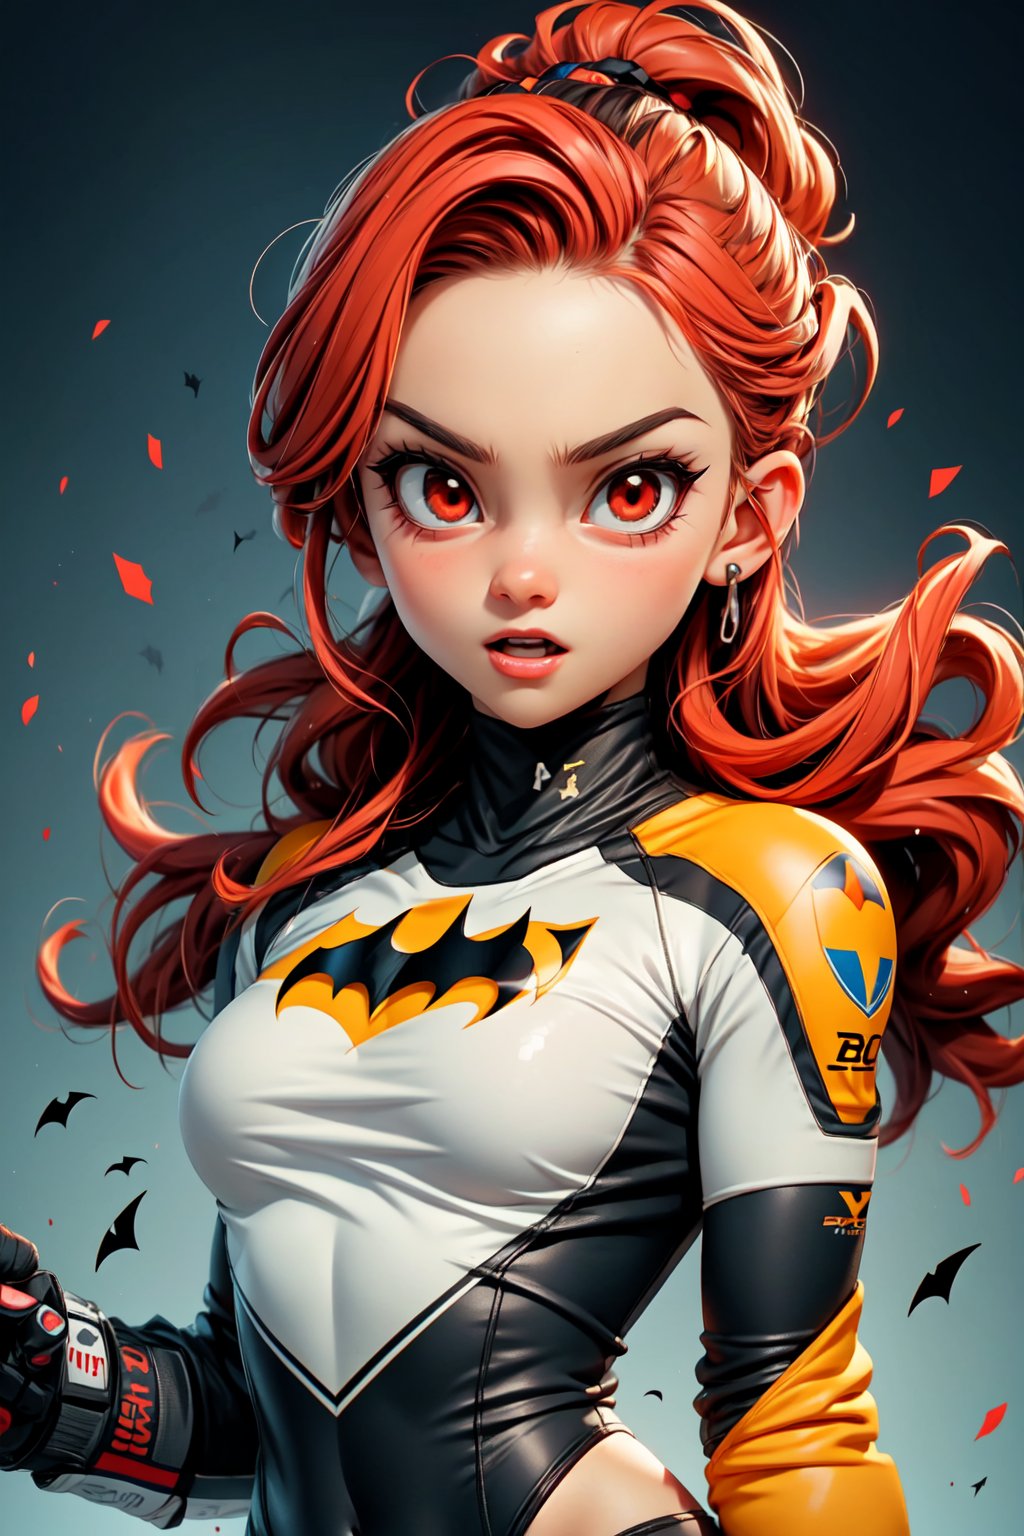 (best quality), (UHQ, 8k, high resolution), Generate a pixel art masterpiece featuring a solo anime girl with a sporty, moto-inspired aesthetic. The character boasts vibrant, electric red hair, and her red eyes gleam with intensity. Dressed in a cutting-edge MotoGP racing suit with batman logos, she strikes a dynamic and confident pose. The atmosphere should convey a thrilling sense of speed and victory, with the character radiating charm and charisma, subtly expressing a connection with the viewer. Ensure the pixel art is of ultra resolution, adopting a dynamic aspect ratio, and capturing the essence of 'simple --niji' and 'kpop girl' styles. Emphasize the character's forehead, sleek physique, and infuse the scene with an energetic and endearing expression.